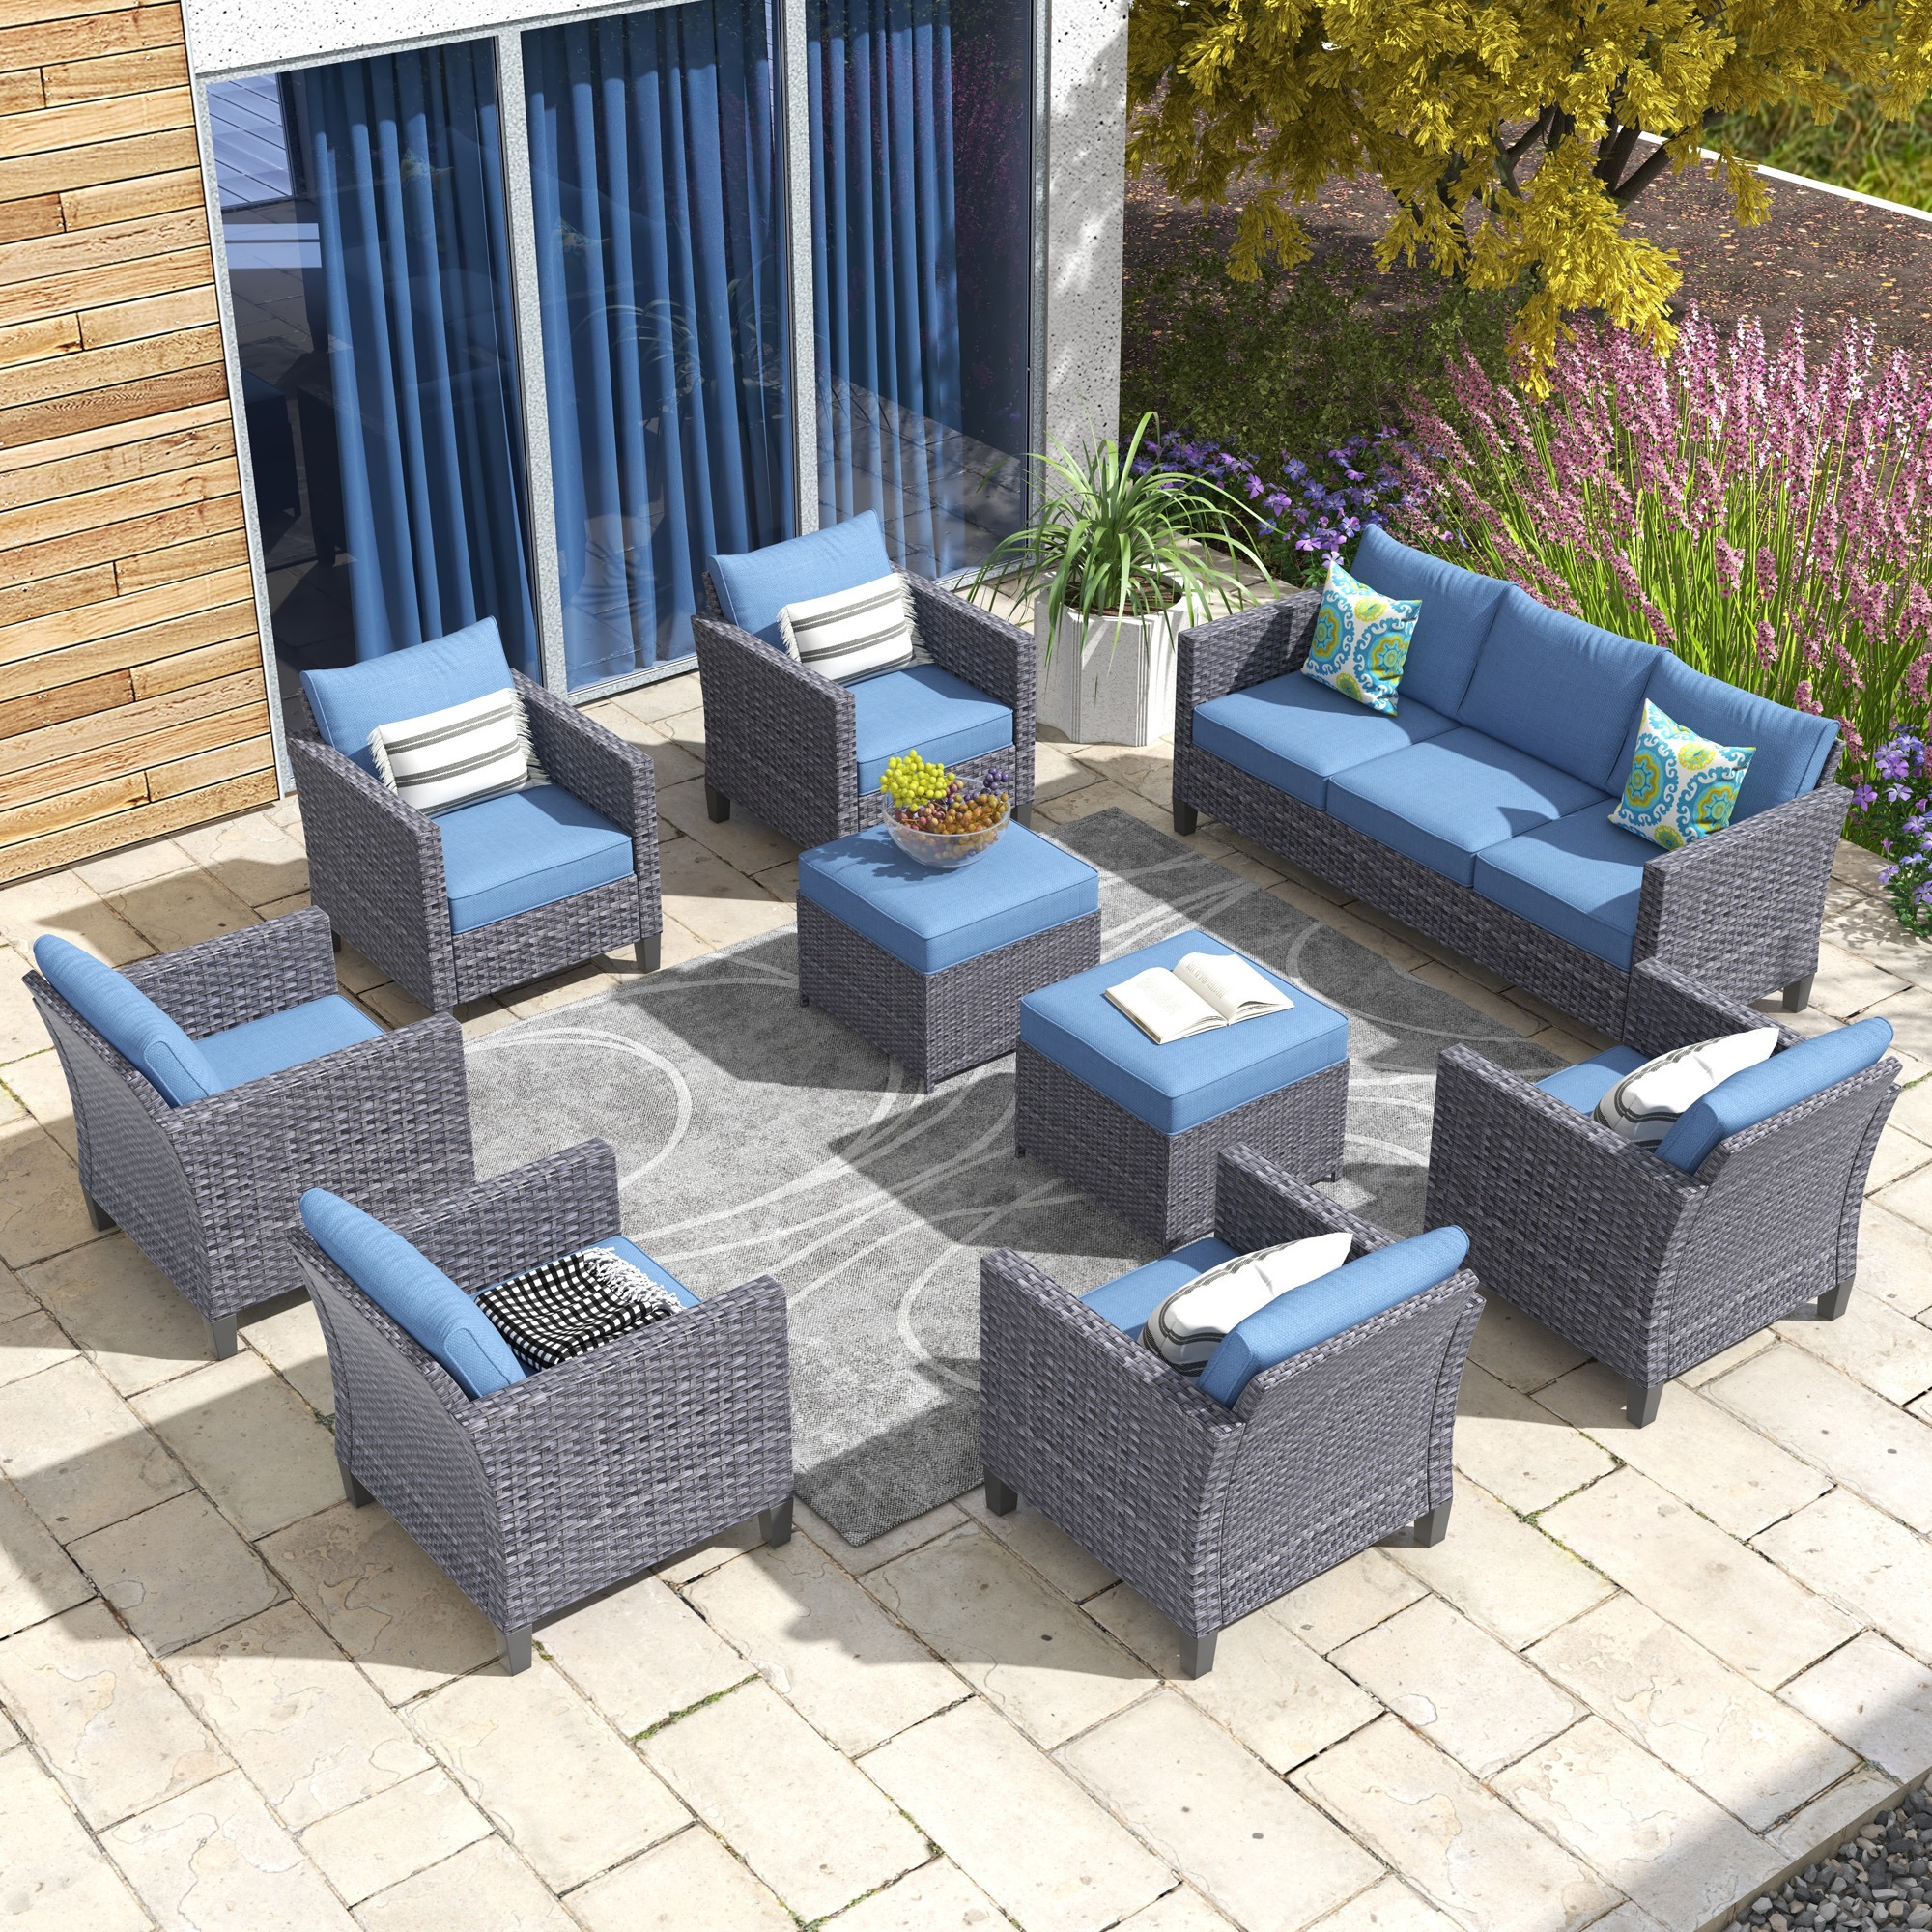 Ovios 9 Piece Outdoor Furniture All Weather Patio Conversation Chair Set Wicker Sectional Sofa with Soft Cushions for Garden Backyard (Denim Blue) - image 2 of 7